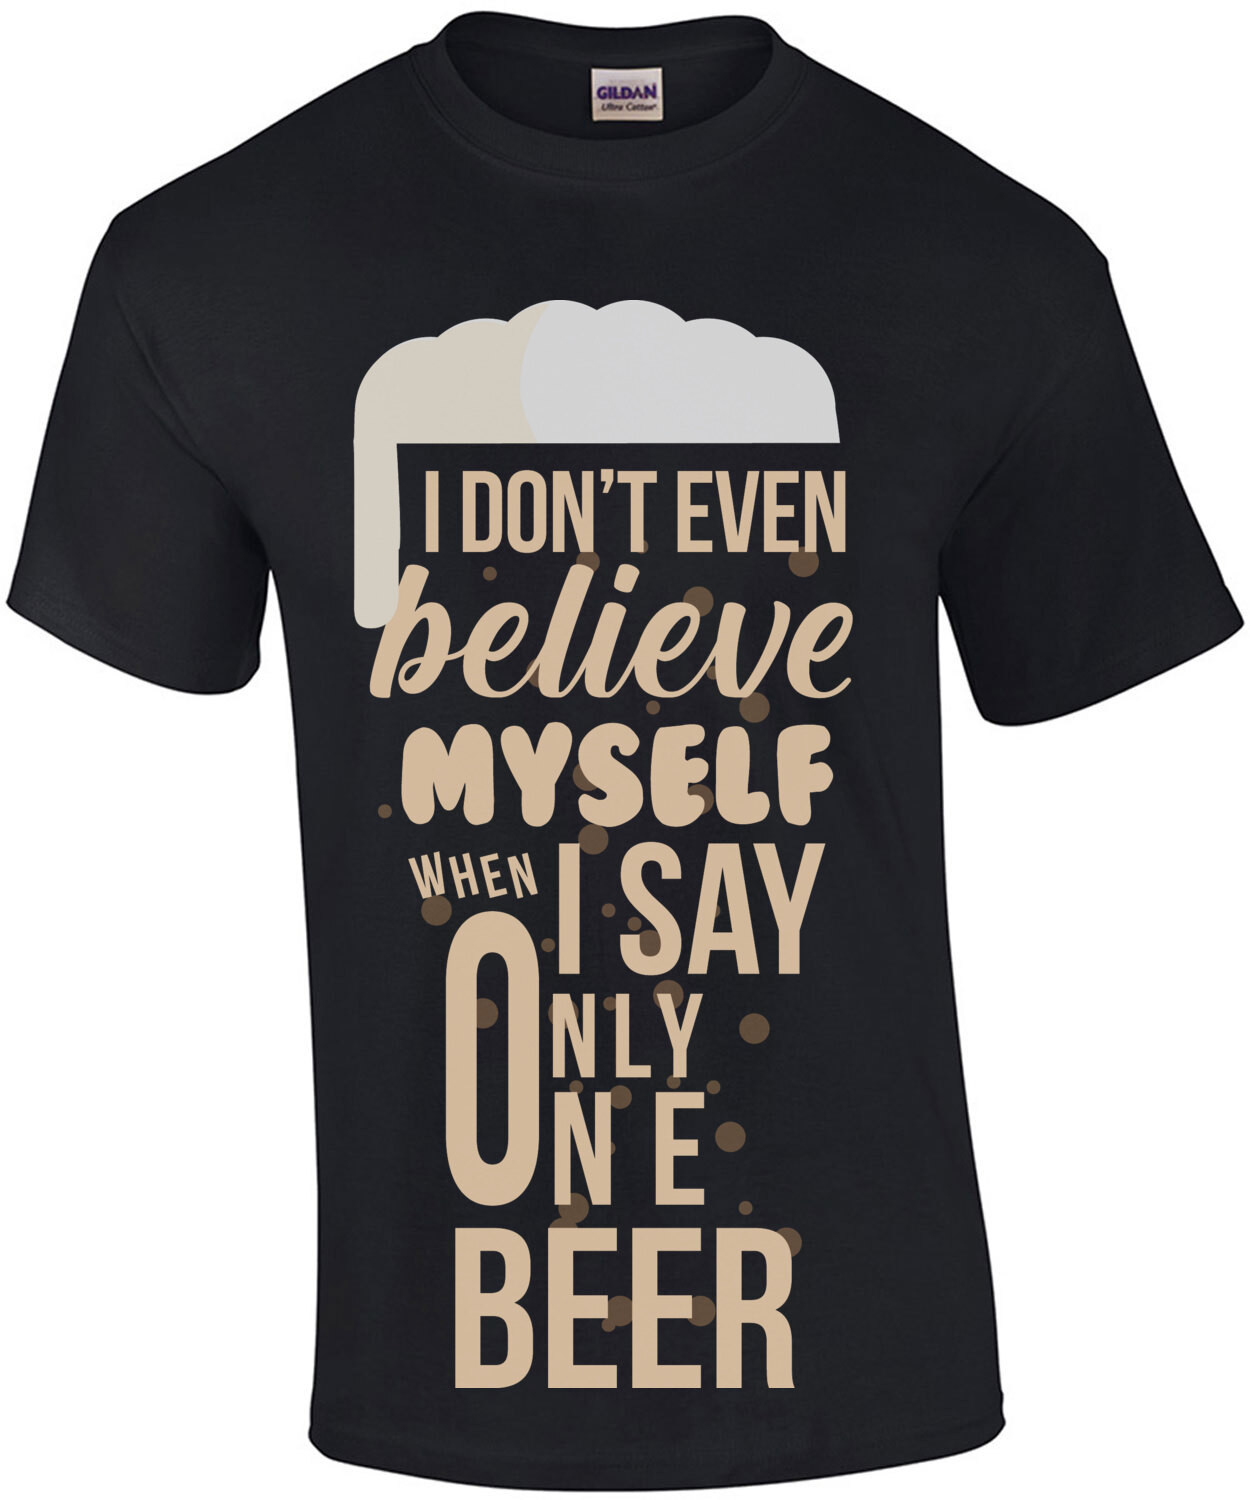 I don't even believe myself when I say only one beer - funny beer t-shirt